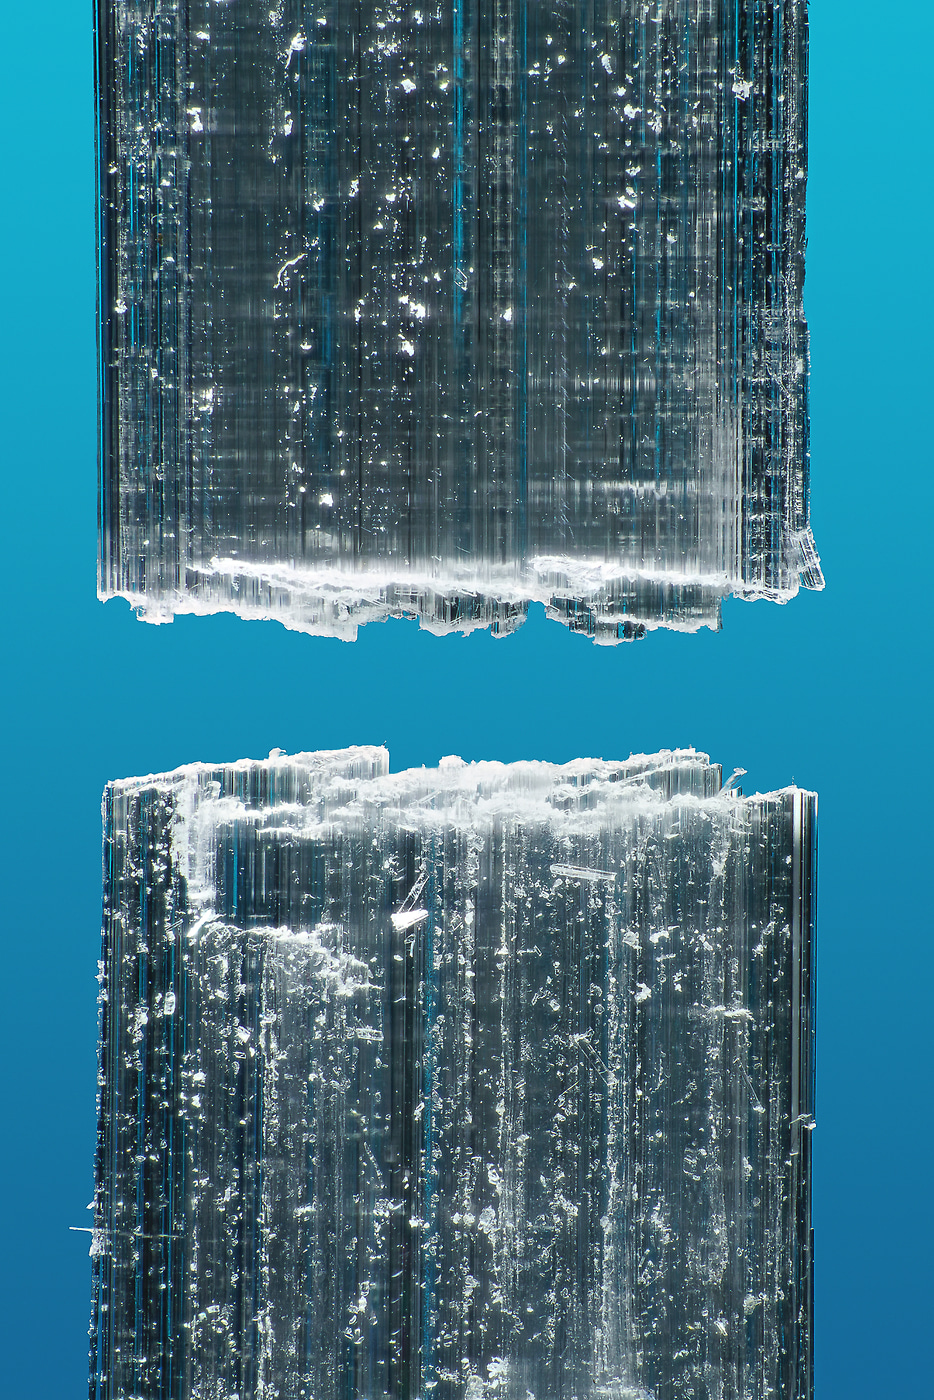 42 megapixels! A very high resolution photo of crystals; VAST photo created by Steph Mantis & Dan Piech